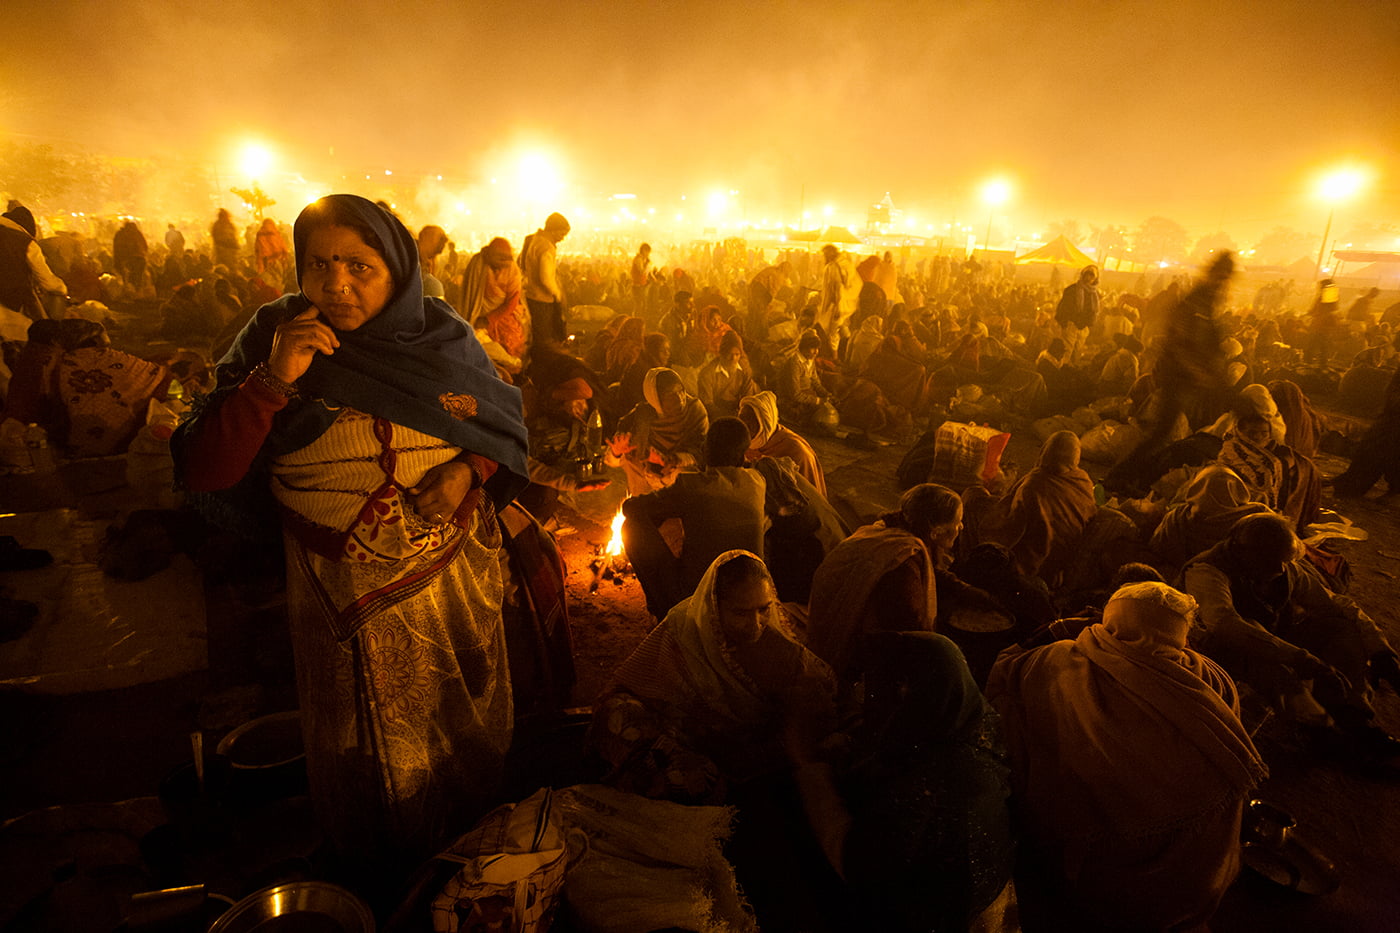 Millions stayed overnight under the open sky for a holy dip during the 2013 Kumbh Mela on the Ganges in Prayagraj.